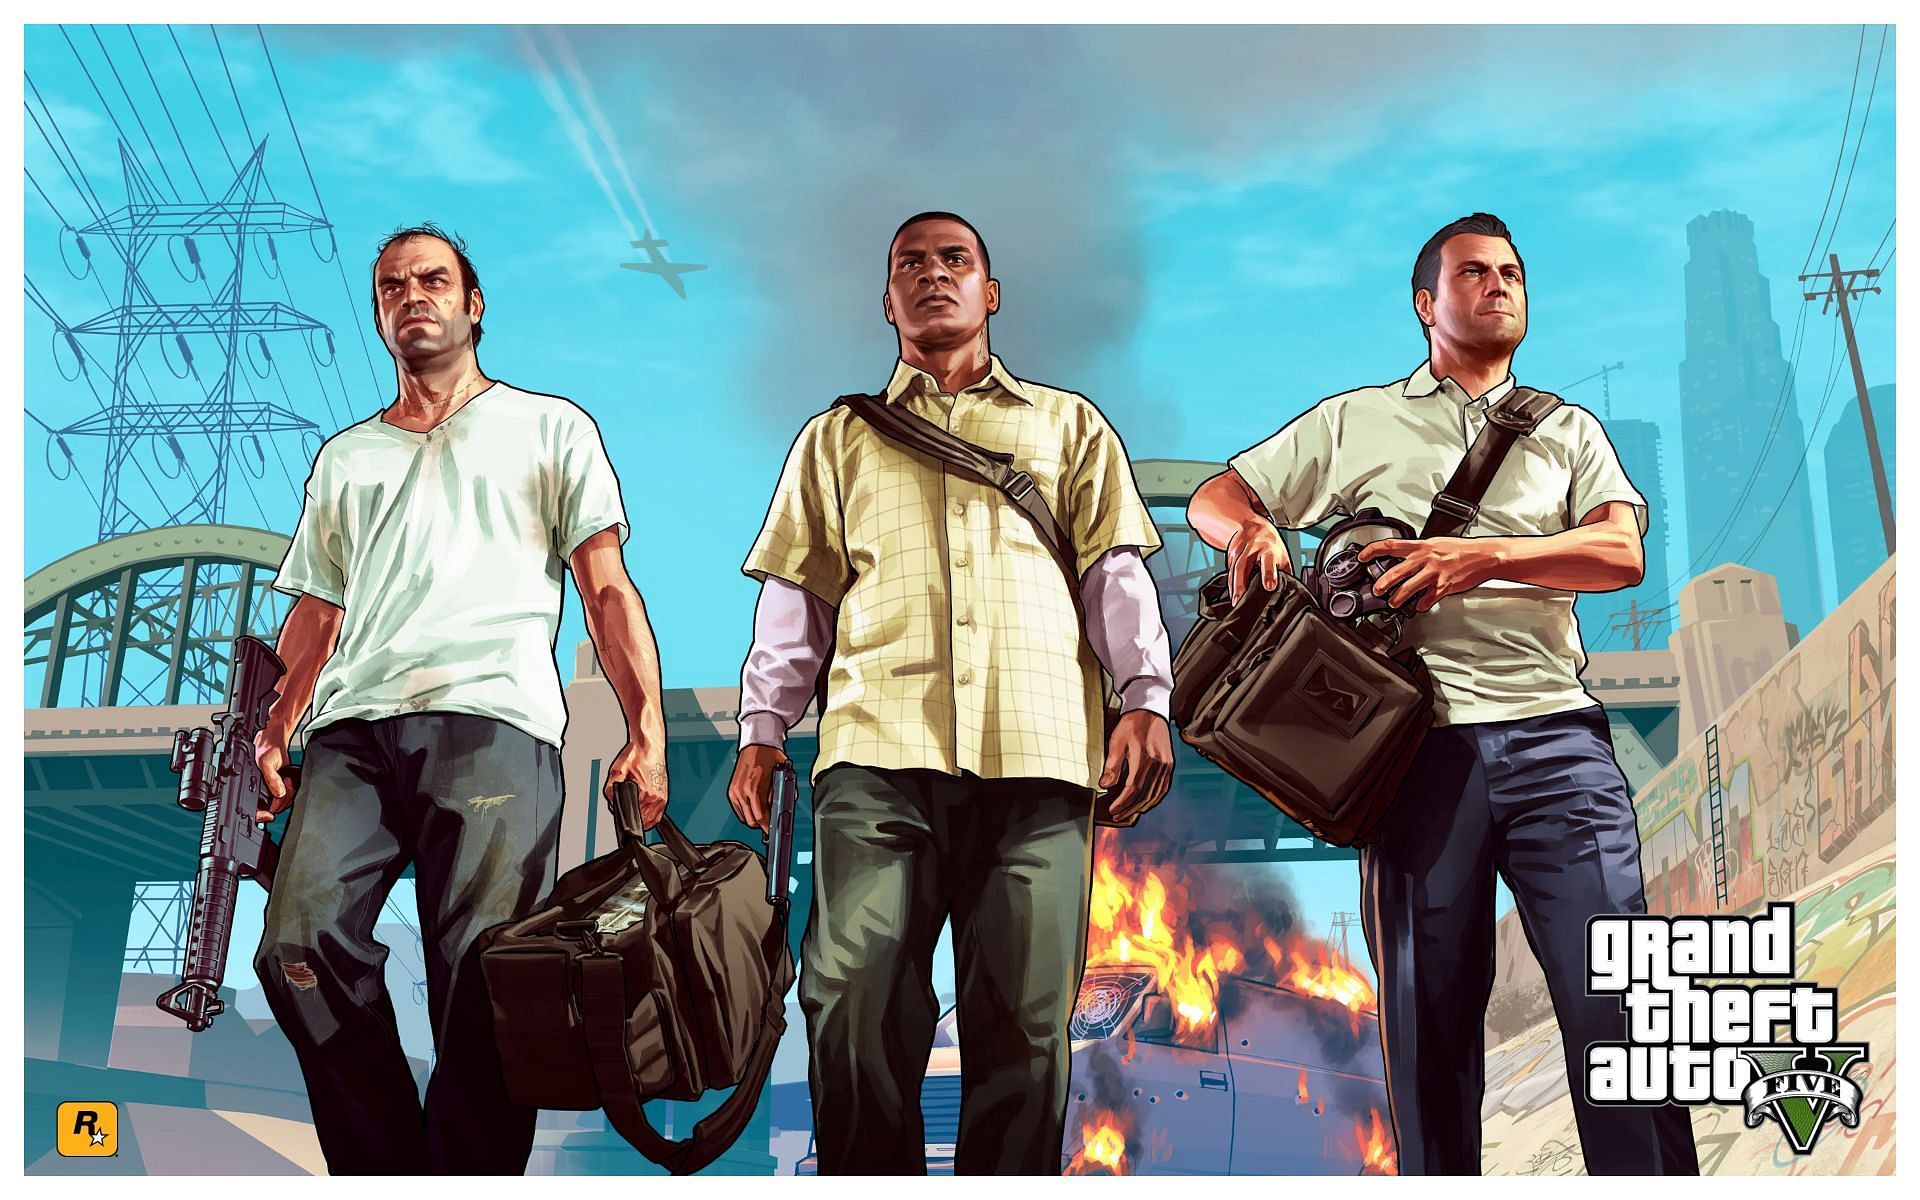 Like any other game, GTA 5 also have flaws (Images via Rockstar Games)